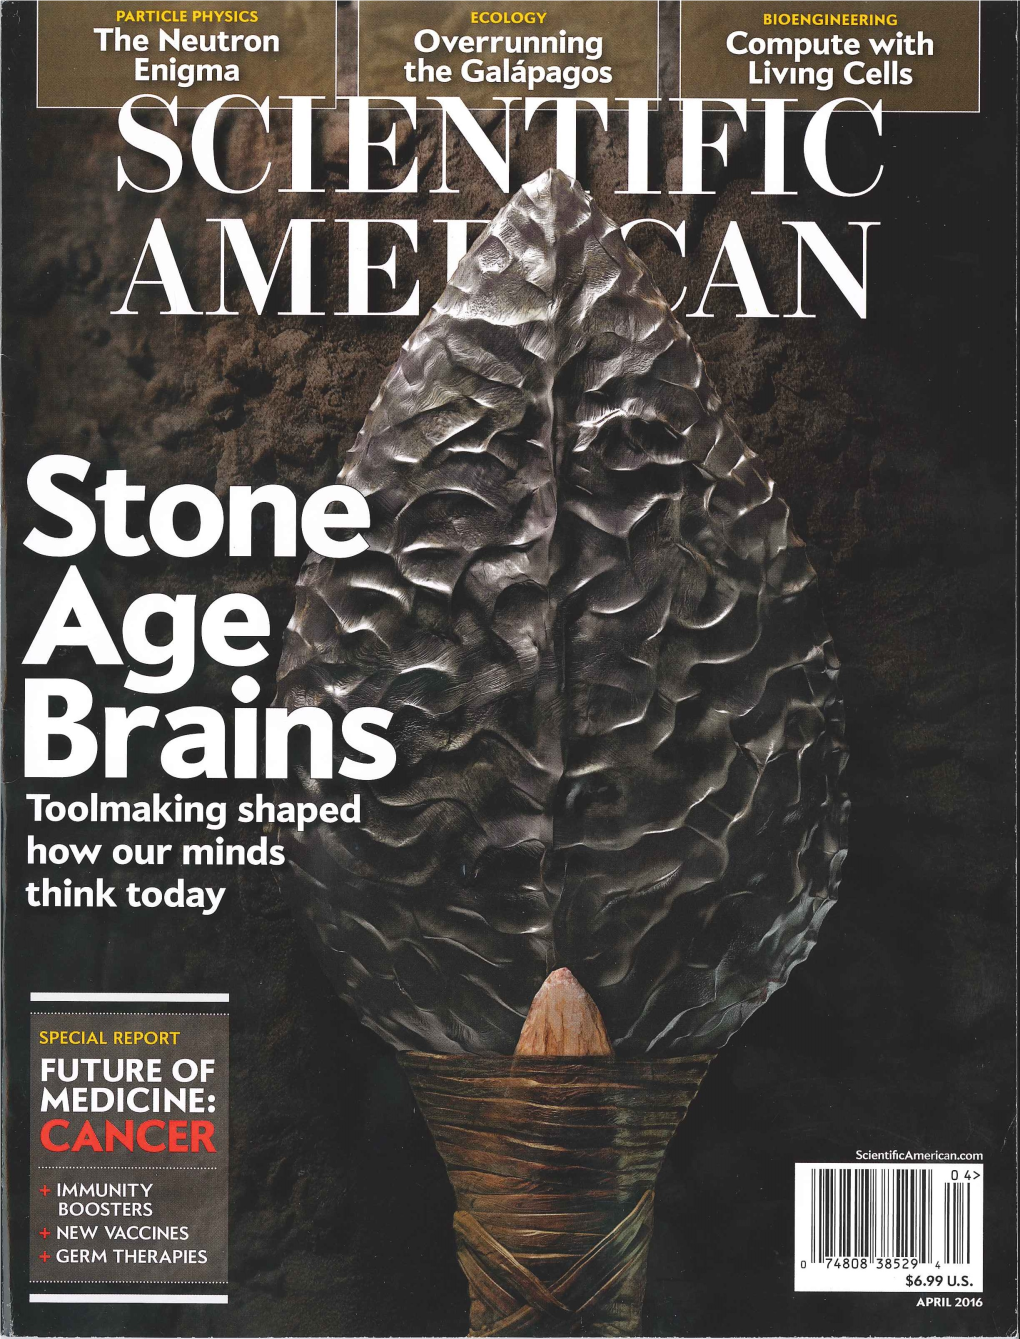 TALES of a STONE AGE NEUROSCIENTIST by Honing Toolmaking Skills While Scanning Their Own Brains, Researchers Are Studying How Cognition Evolved by Dietrich Stout